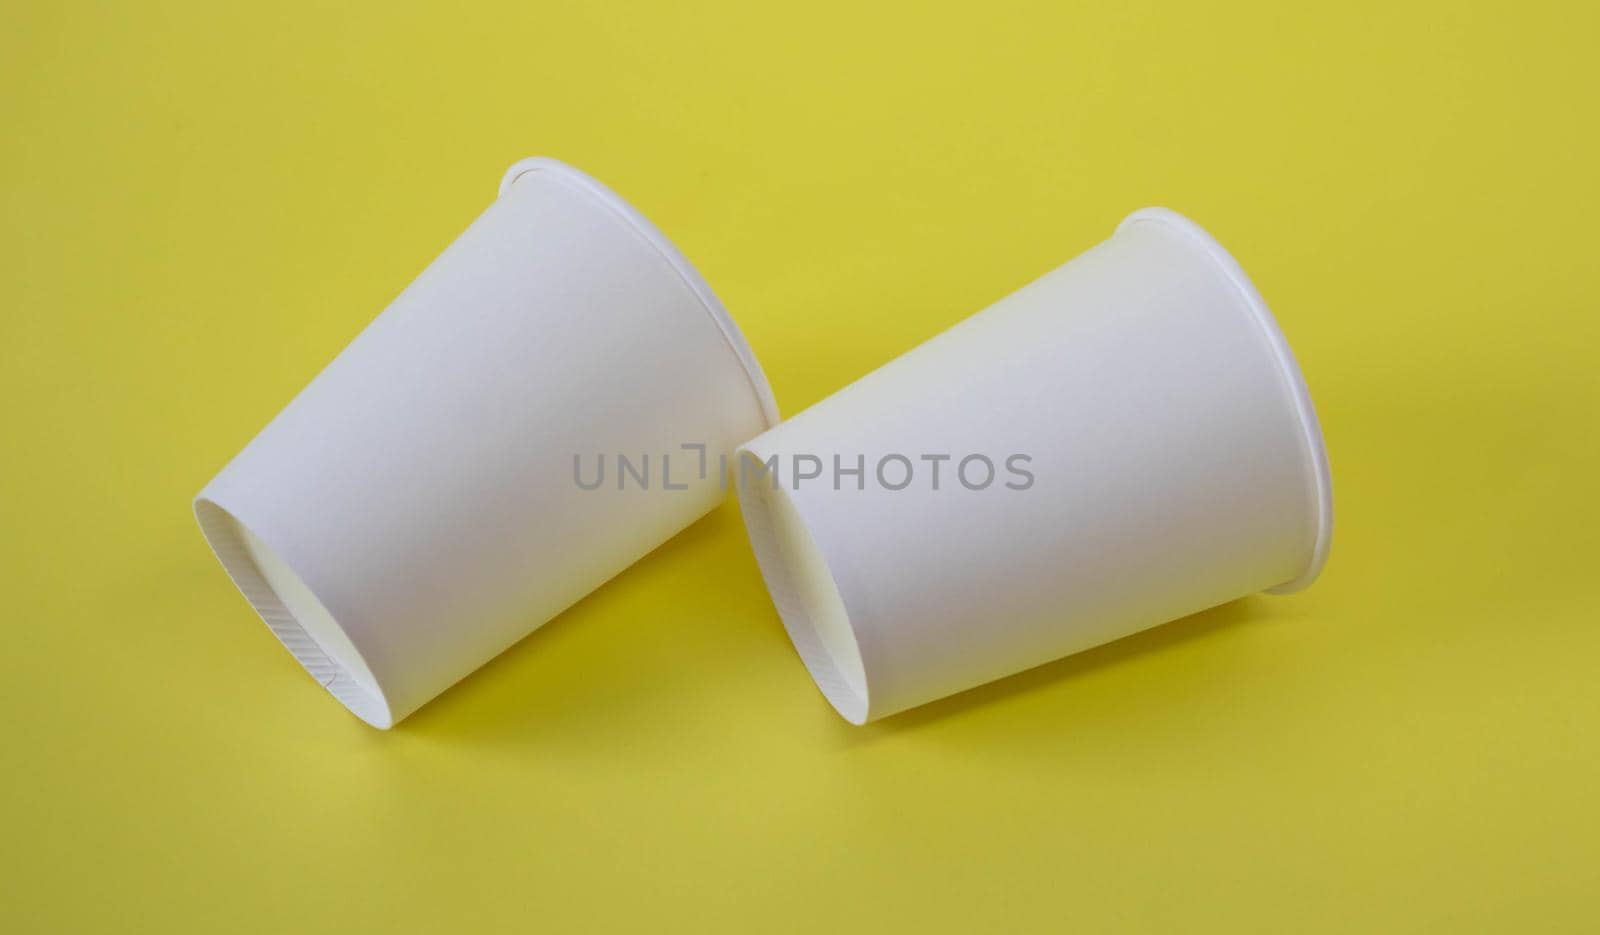 Two small white paper cups on a yellow background by lapushka62